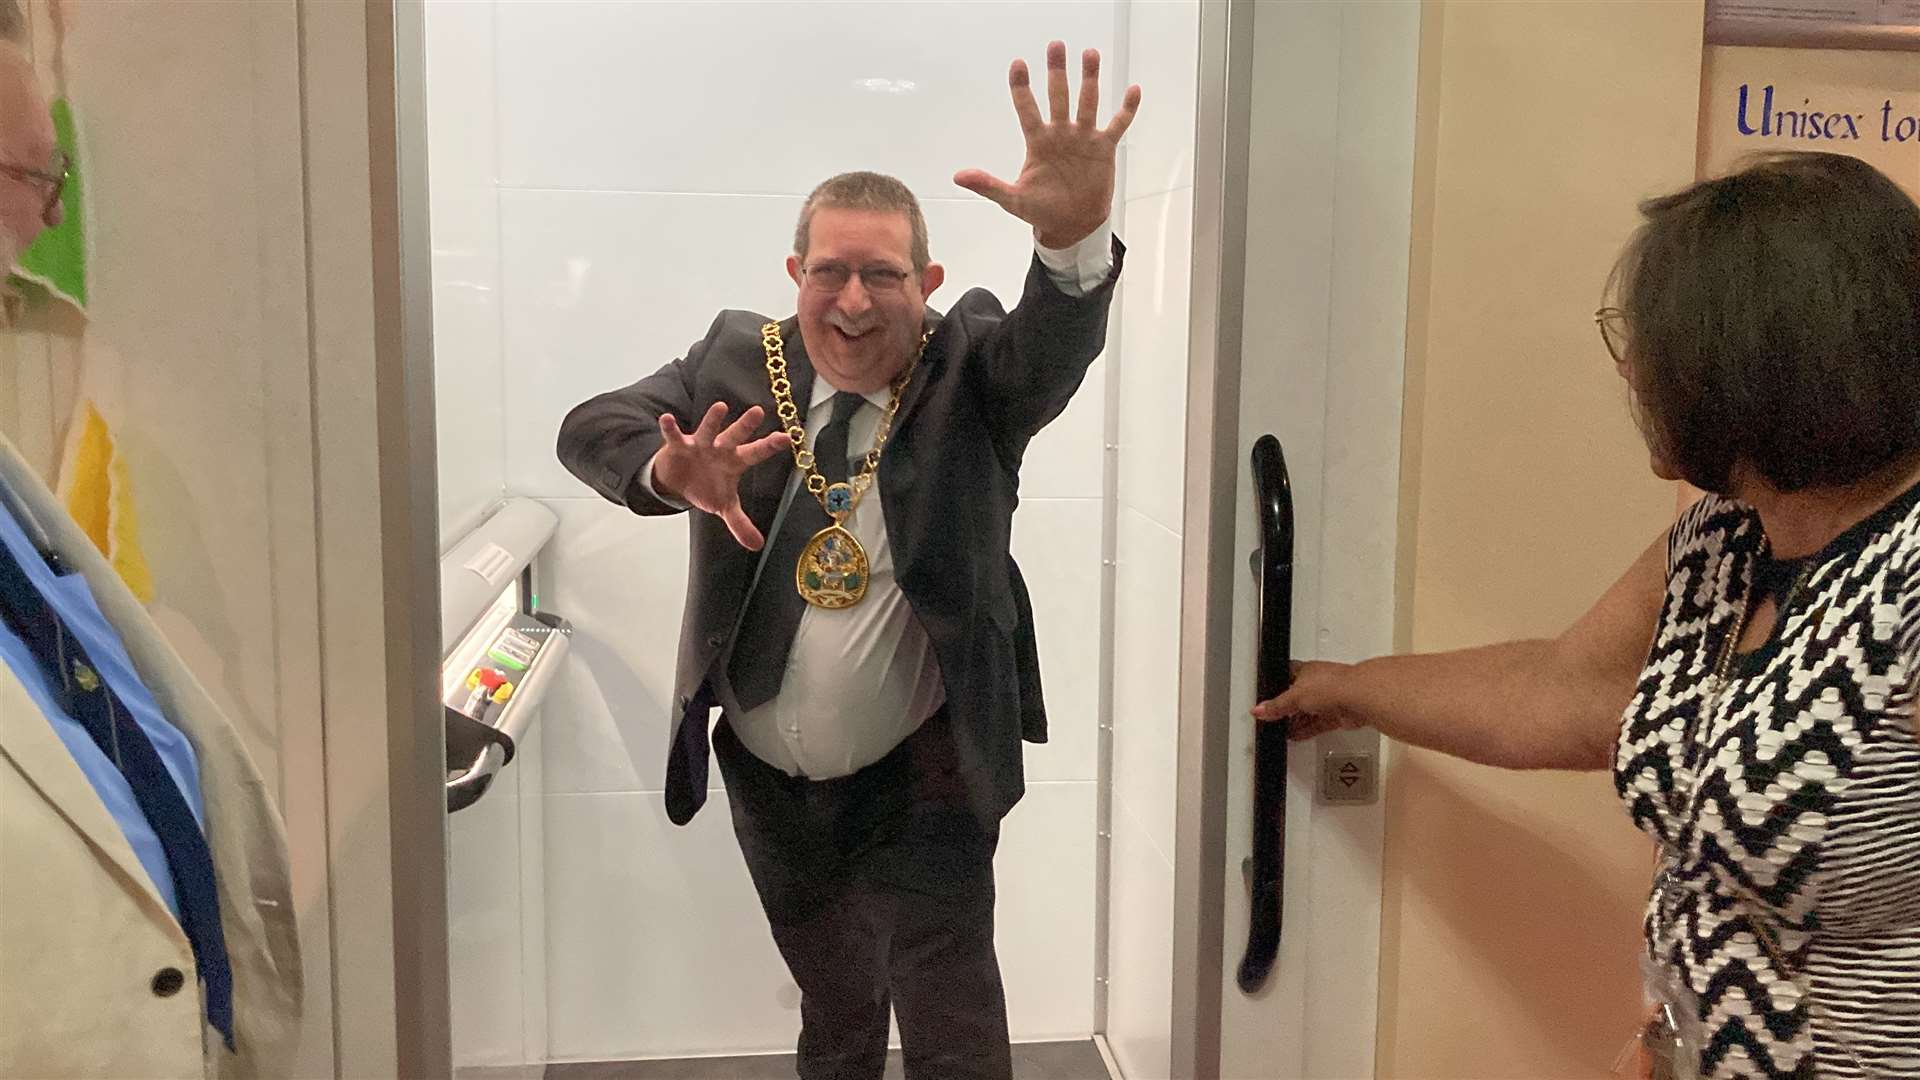 Swale mayor Simon Clark jokingly trying to get out of new lift at the Criterion Theatre